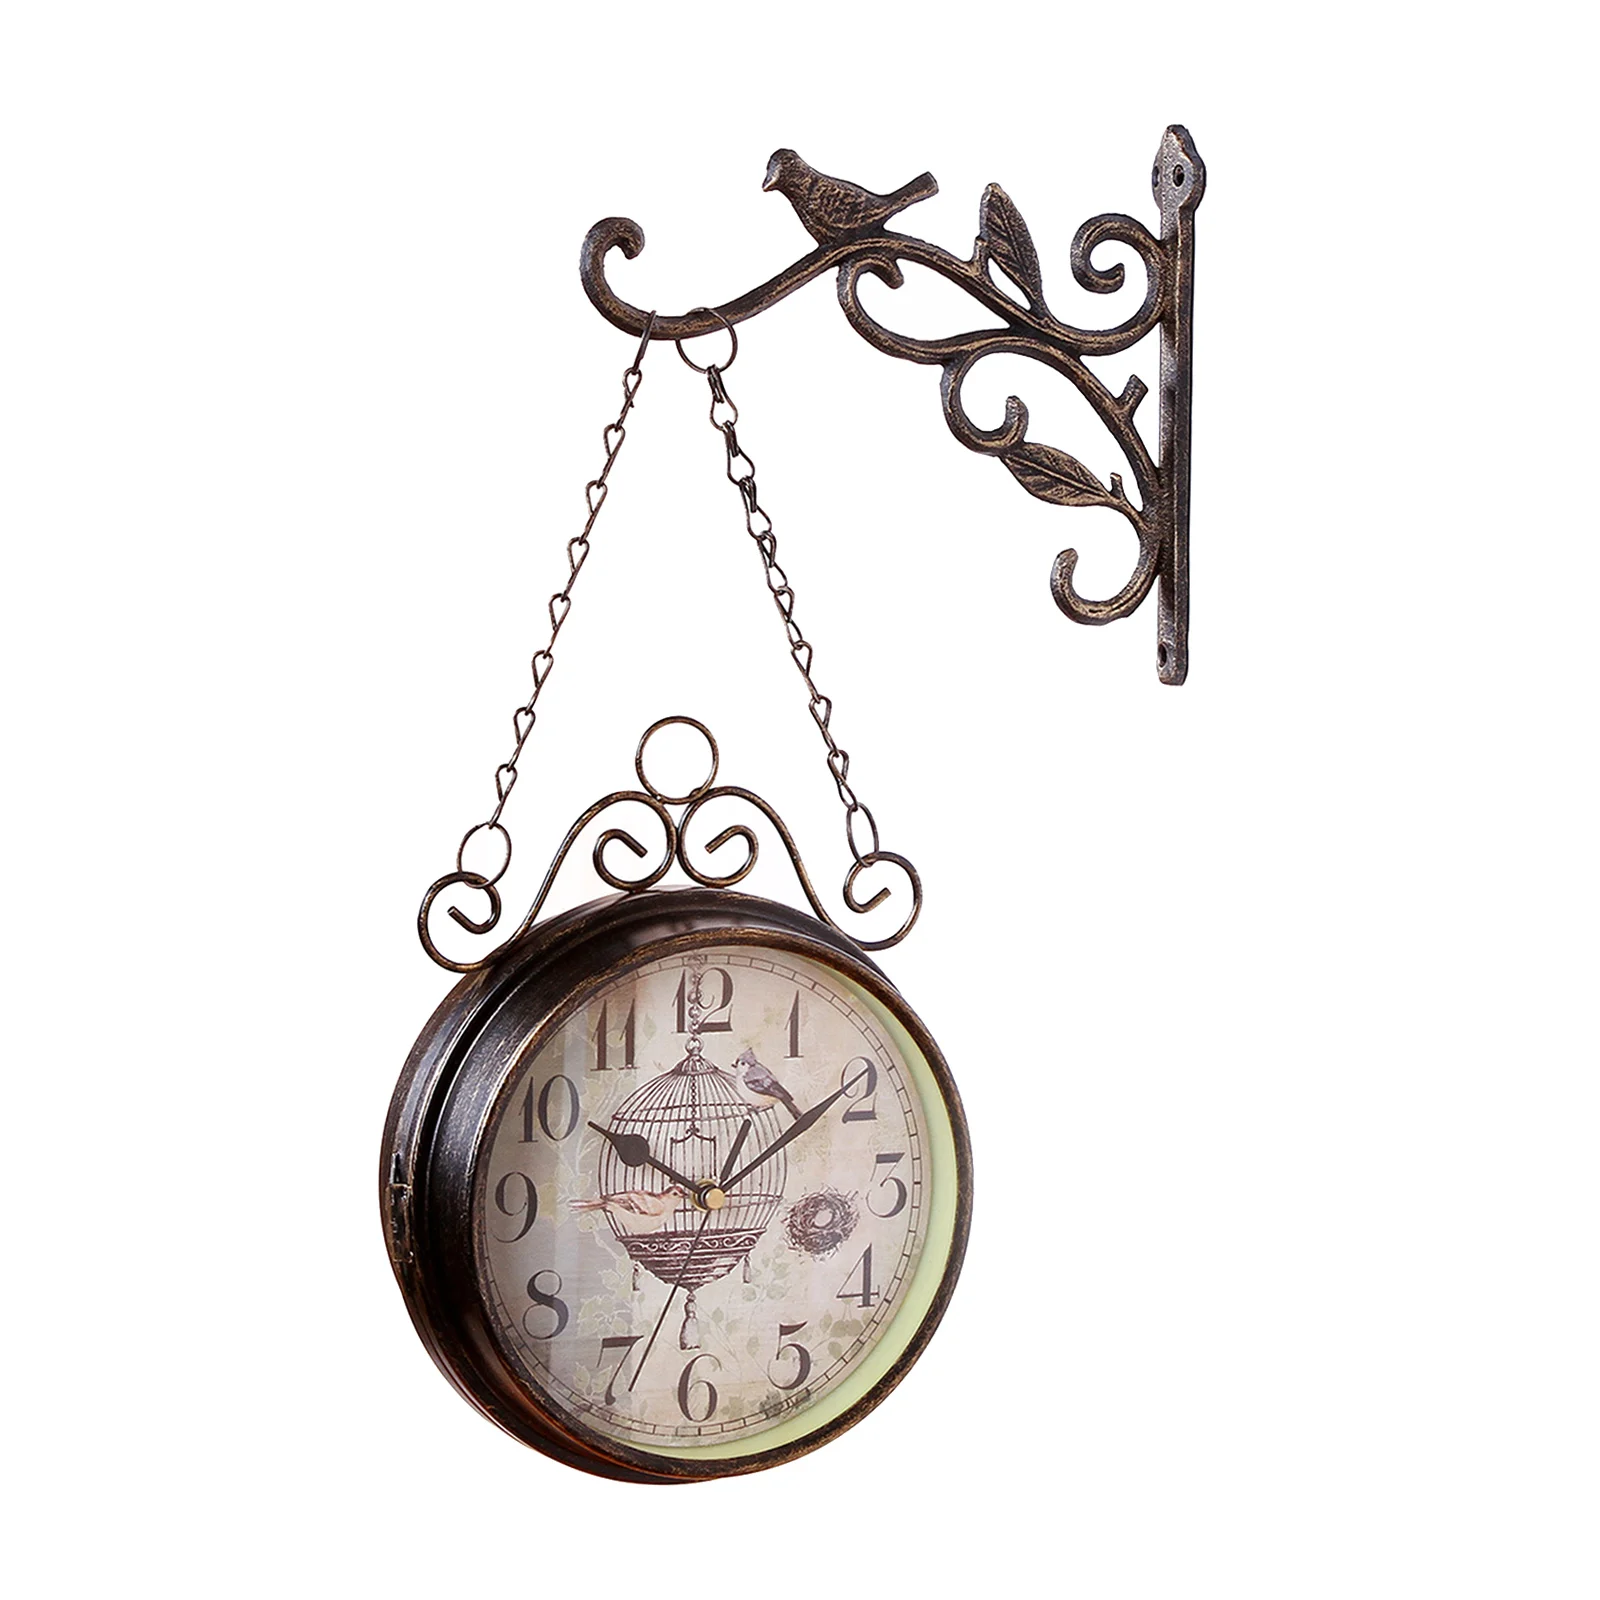 Double Sided Wall Clock Vintage Hanging Non-Ticking Minimalist Easy Read Decorative for Garden Home Living Room Kitchen Bedroom